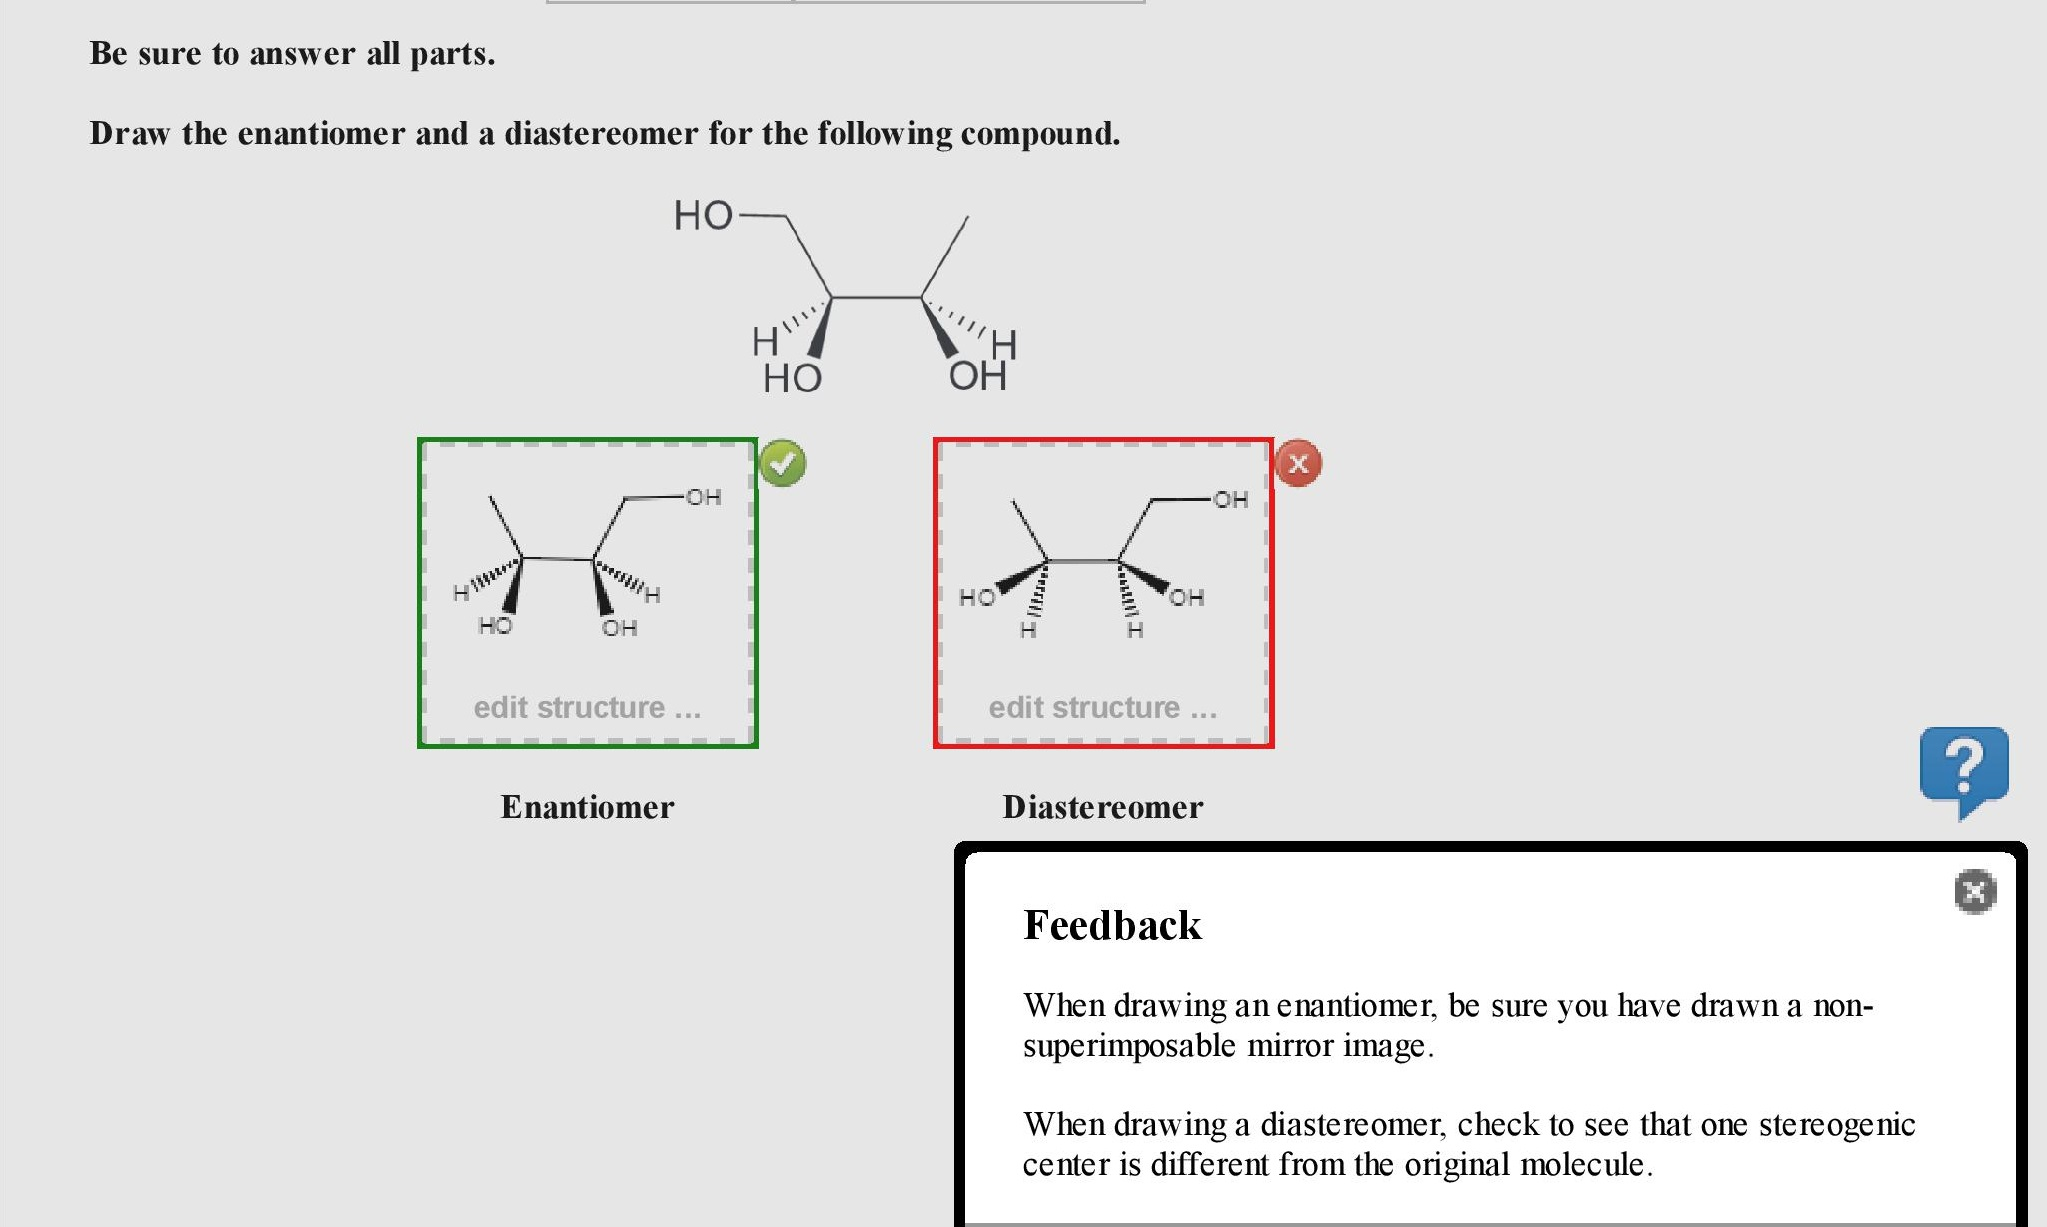 draw a diastereomer for each of the following compounds